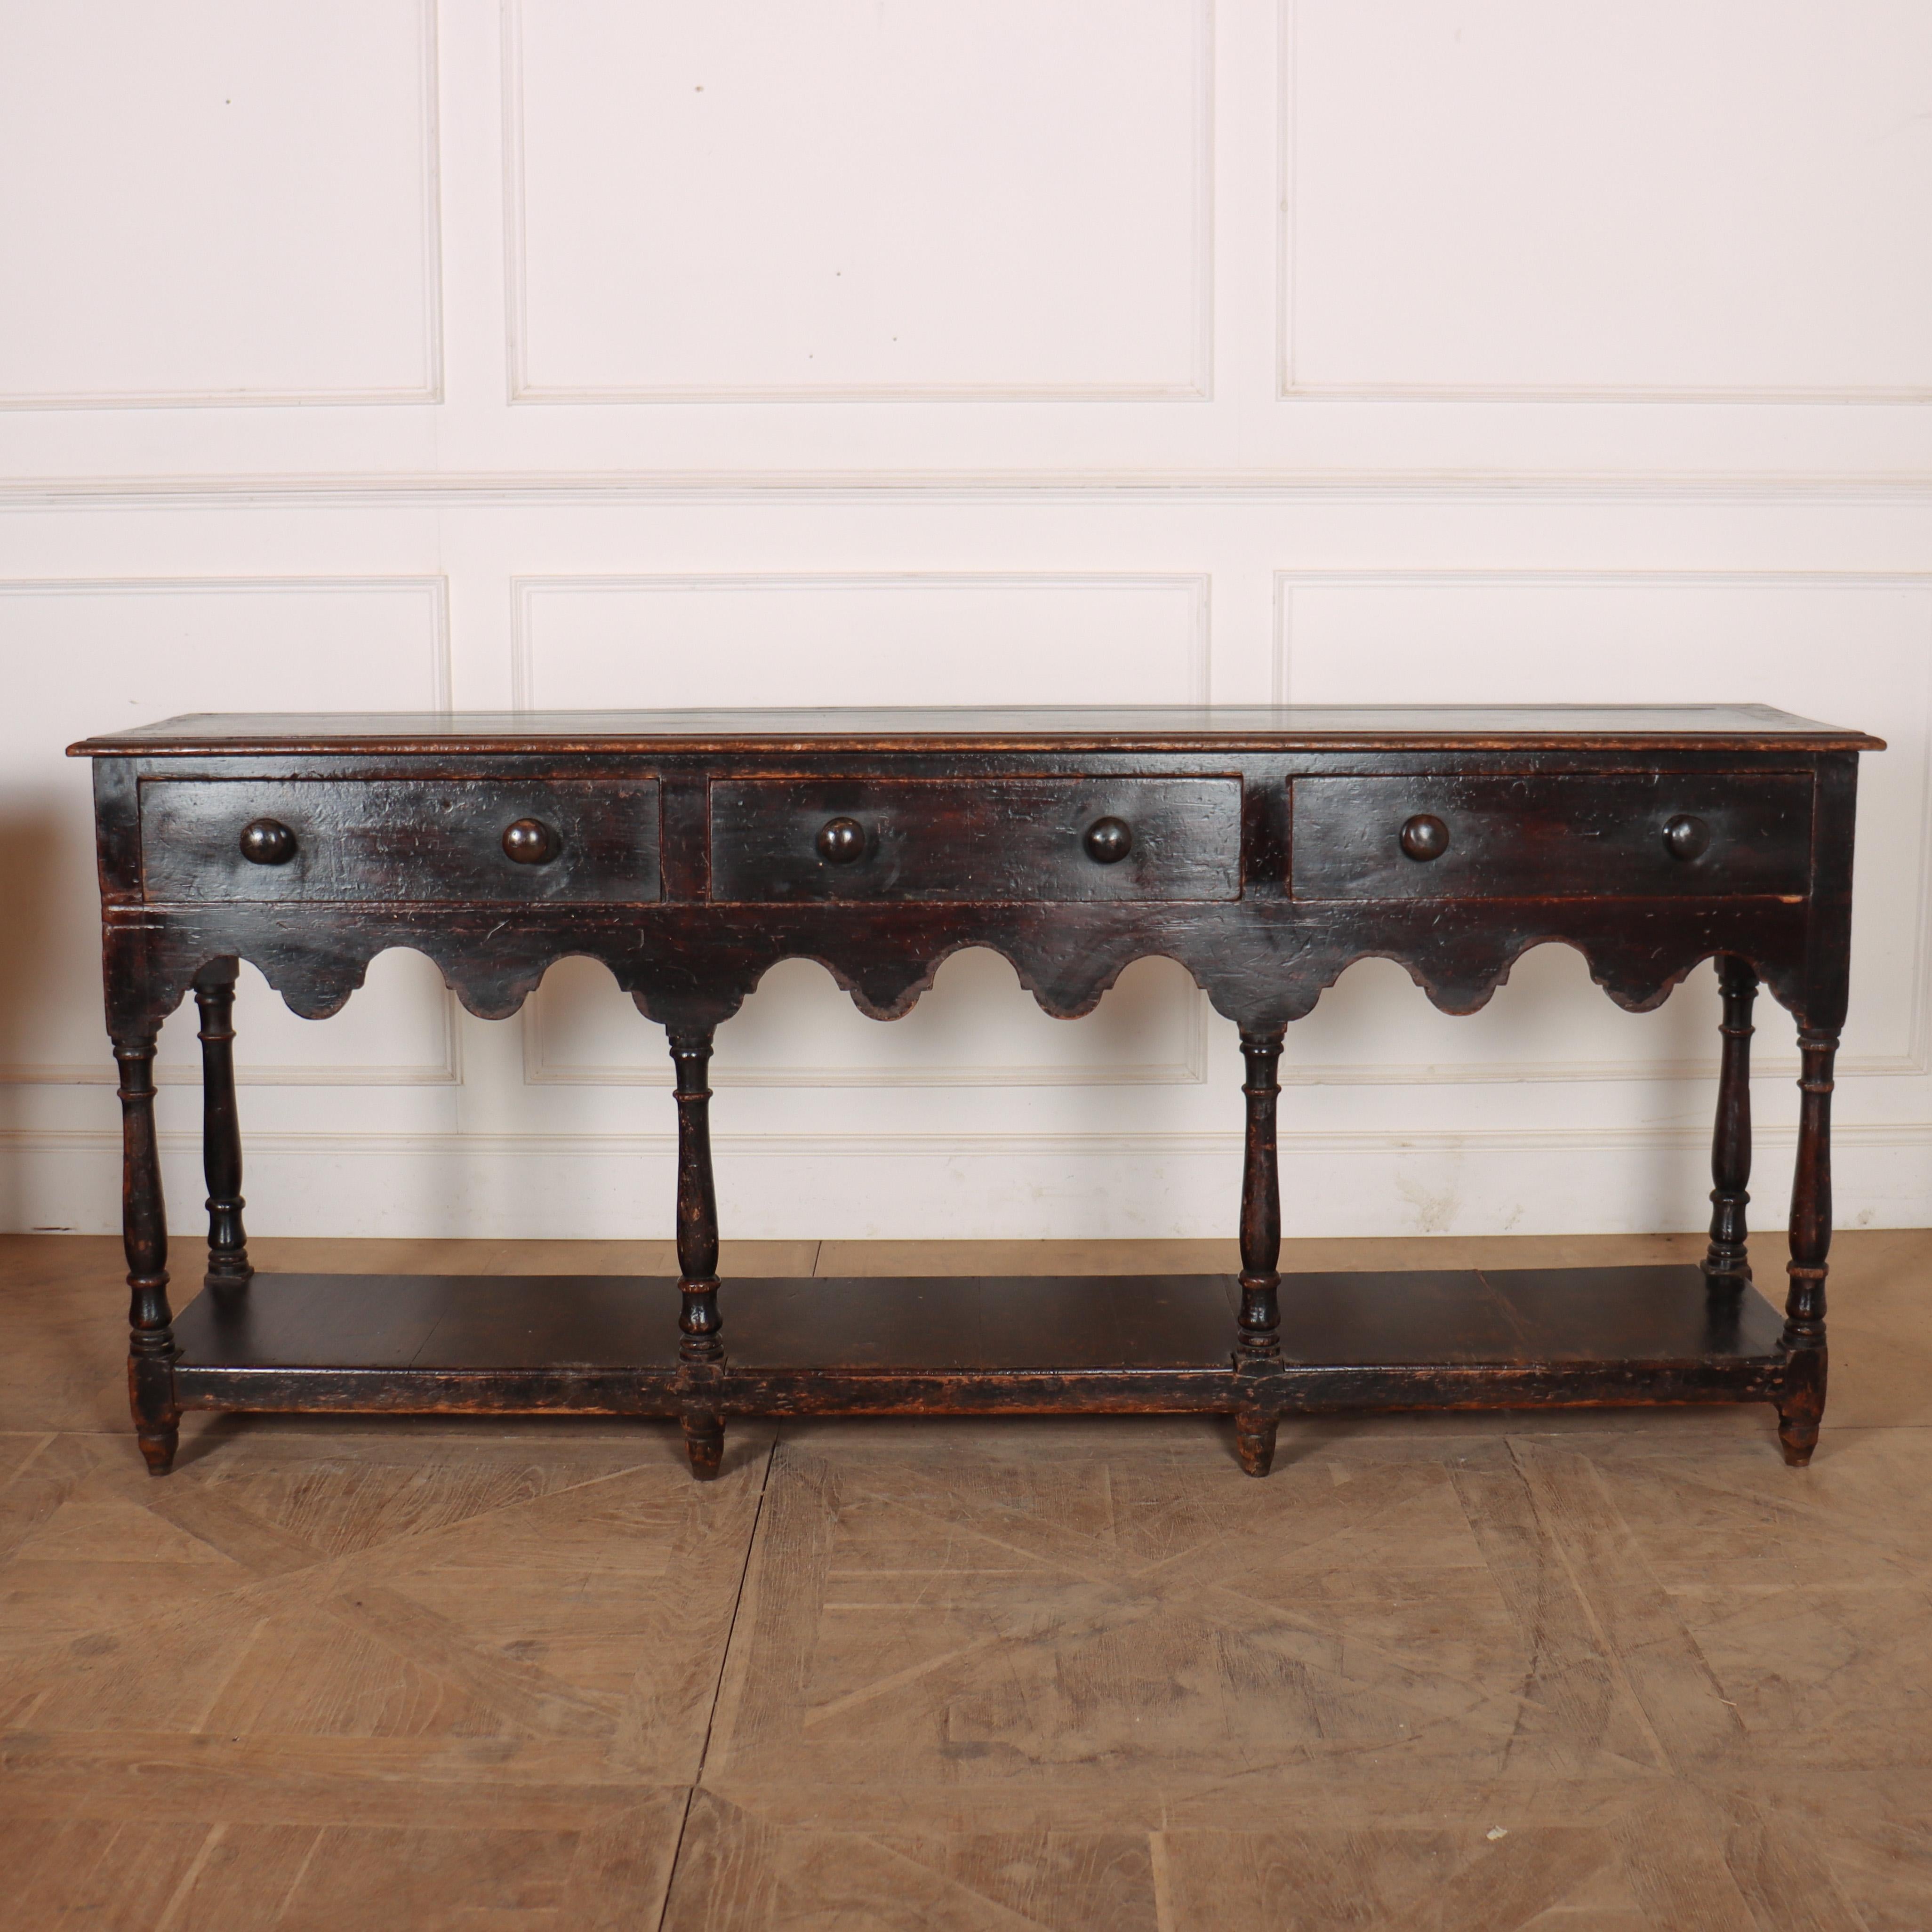 Wonderful early 19th C Welsh patinated pine dresser base with an old paint finish and good proportions. 1810.

Reference: 8401

Dimensions
83 inches (211 cms) Wide
18 inches (46 cms) Deep
35.5 inches (90 cms) High